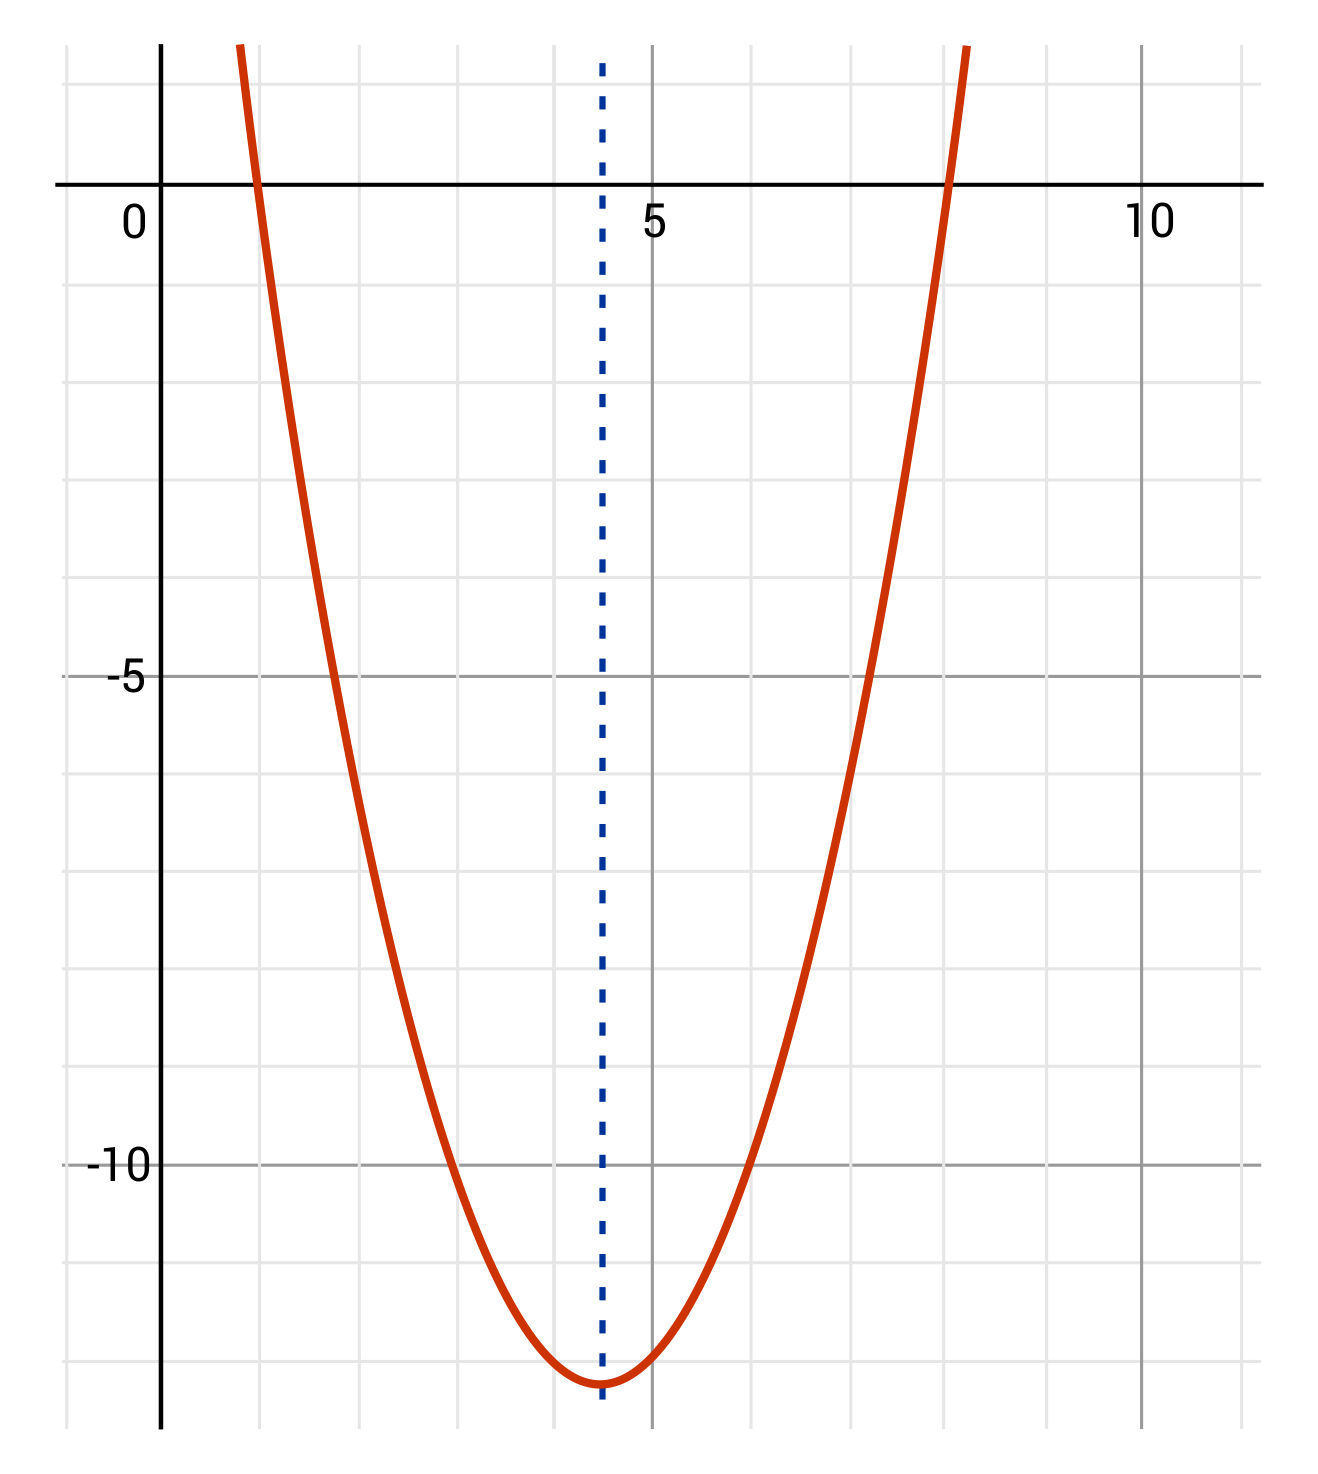 parabola opening upward with axis of symmetry at x=4.5